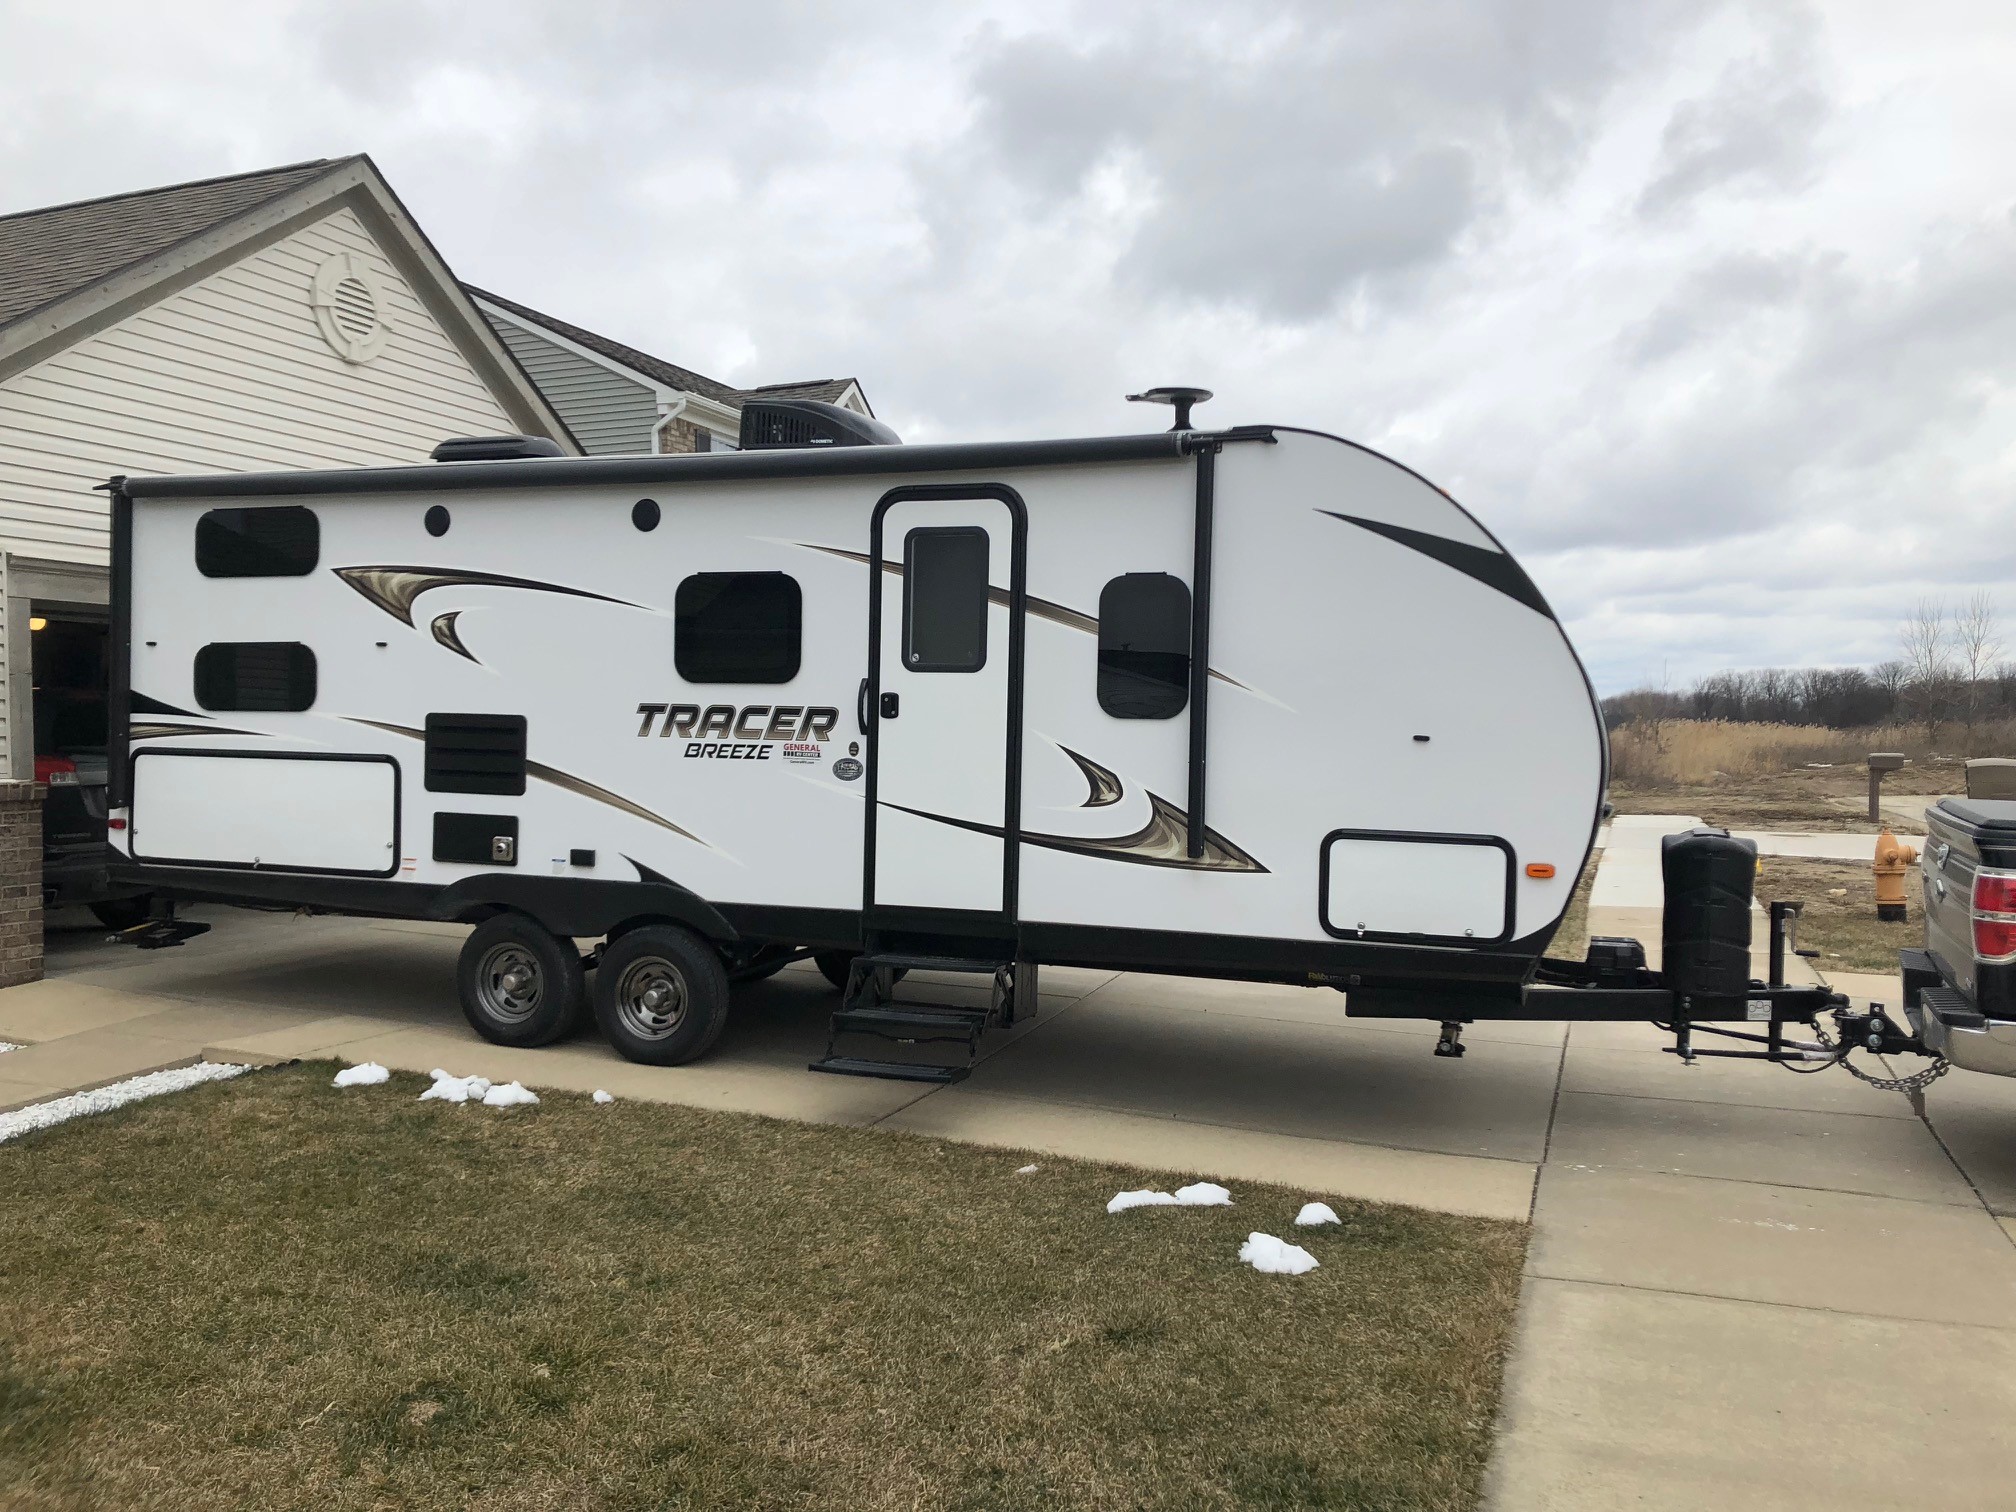 2018 tracer breeze travel trailer 24dbs